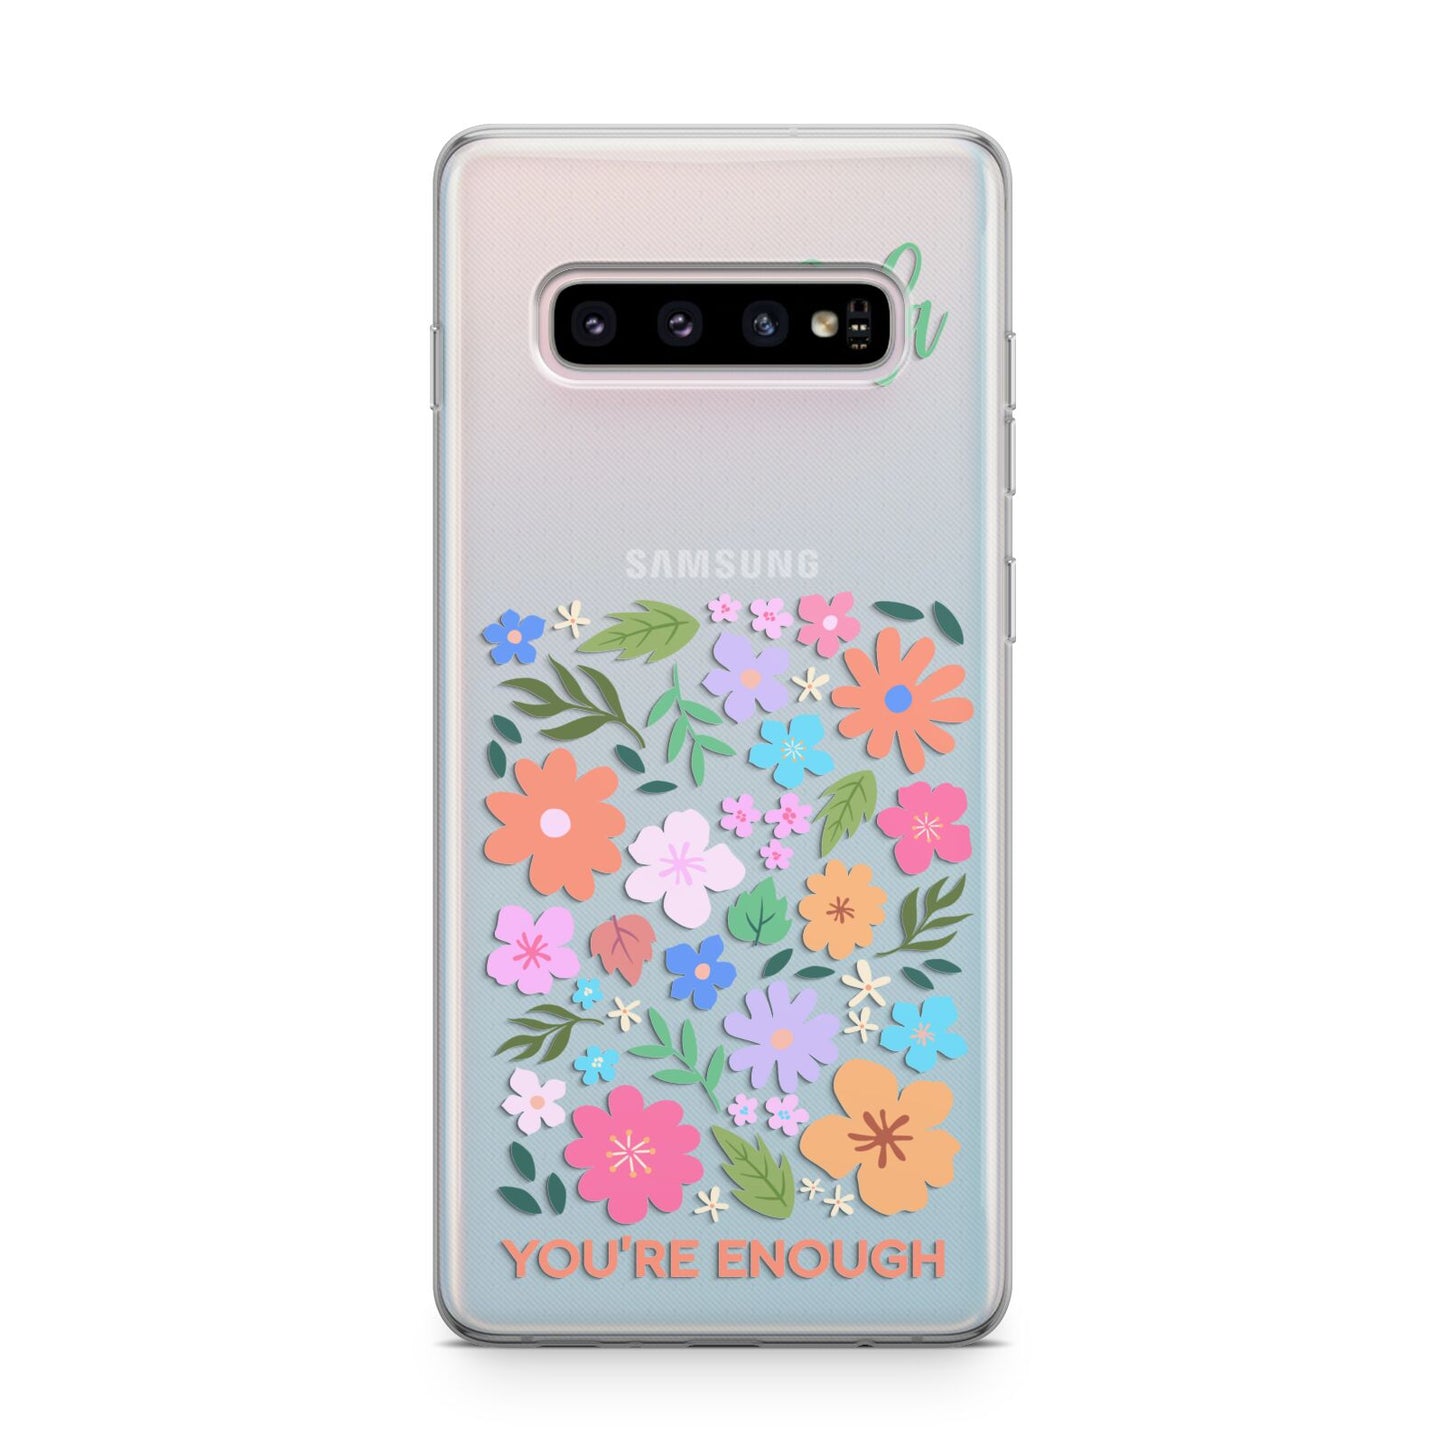 Floral Poster Samsung Galaxy S10 Plus Case